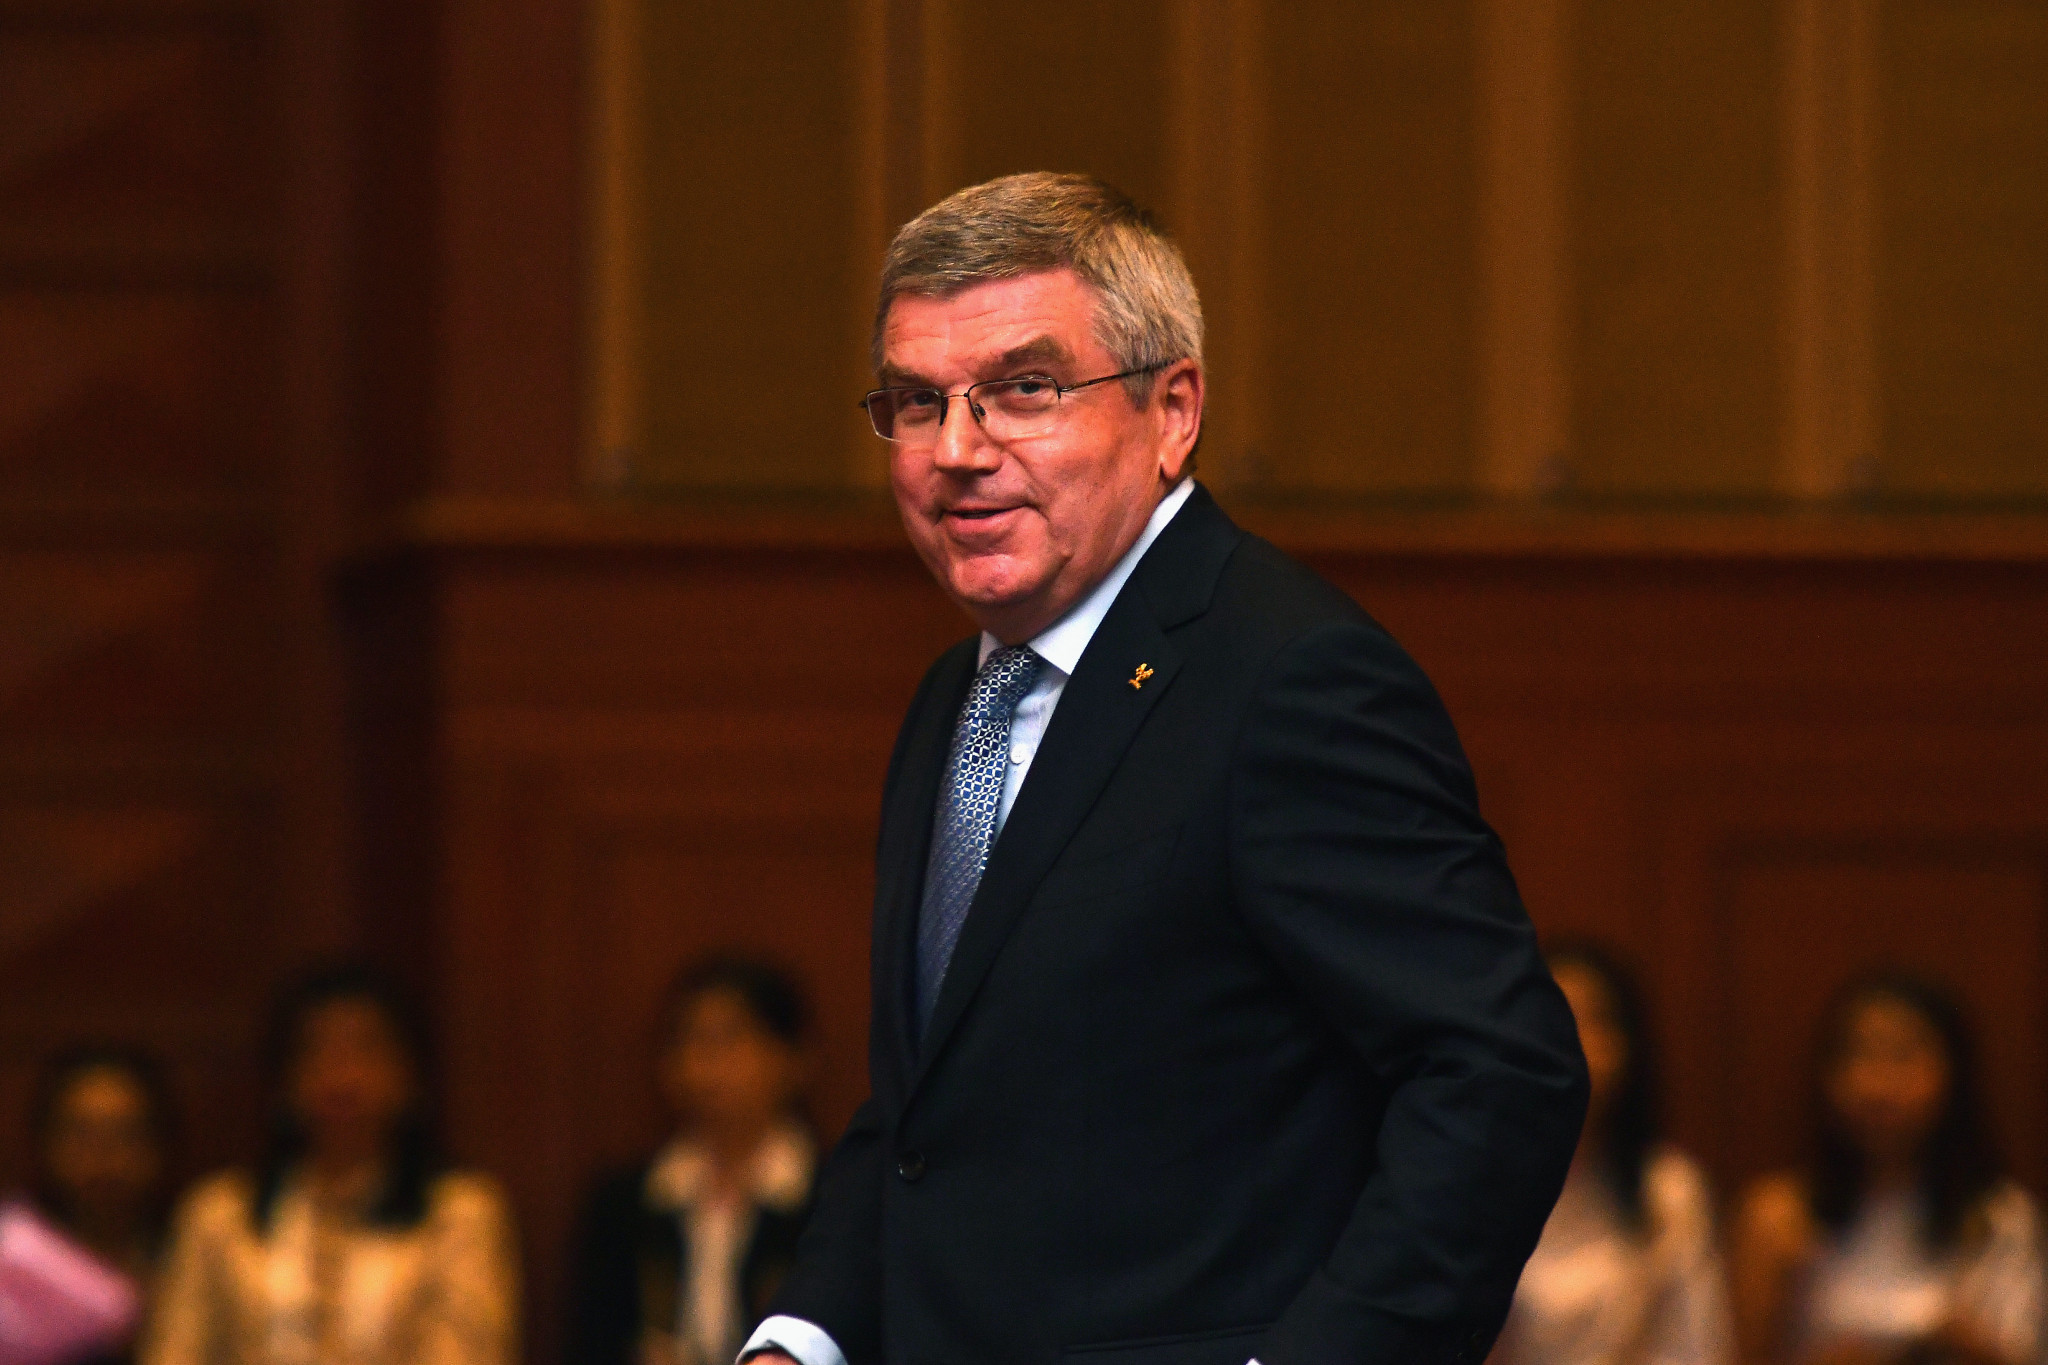 IOC President Thomas Bach stopped short of praising the move from the ITTF, which came when the World Team Table Tennis Championships in Halmstad was already at the quarter-final stage ©Getty Images